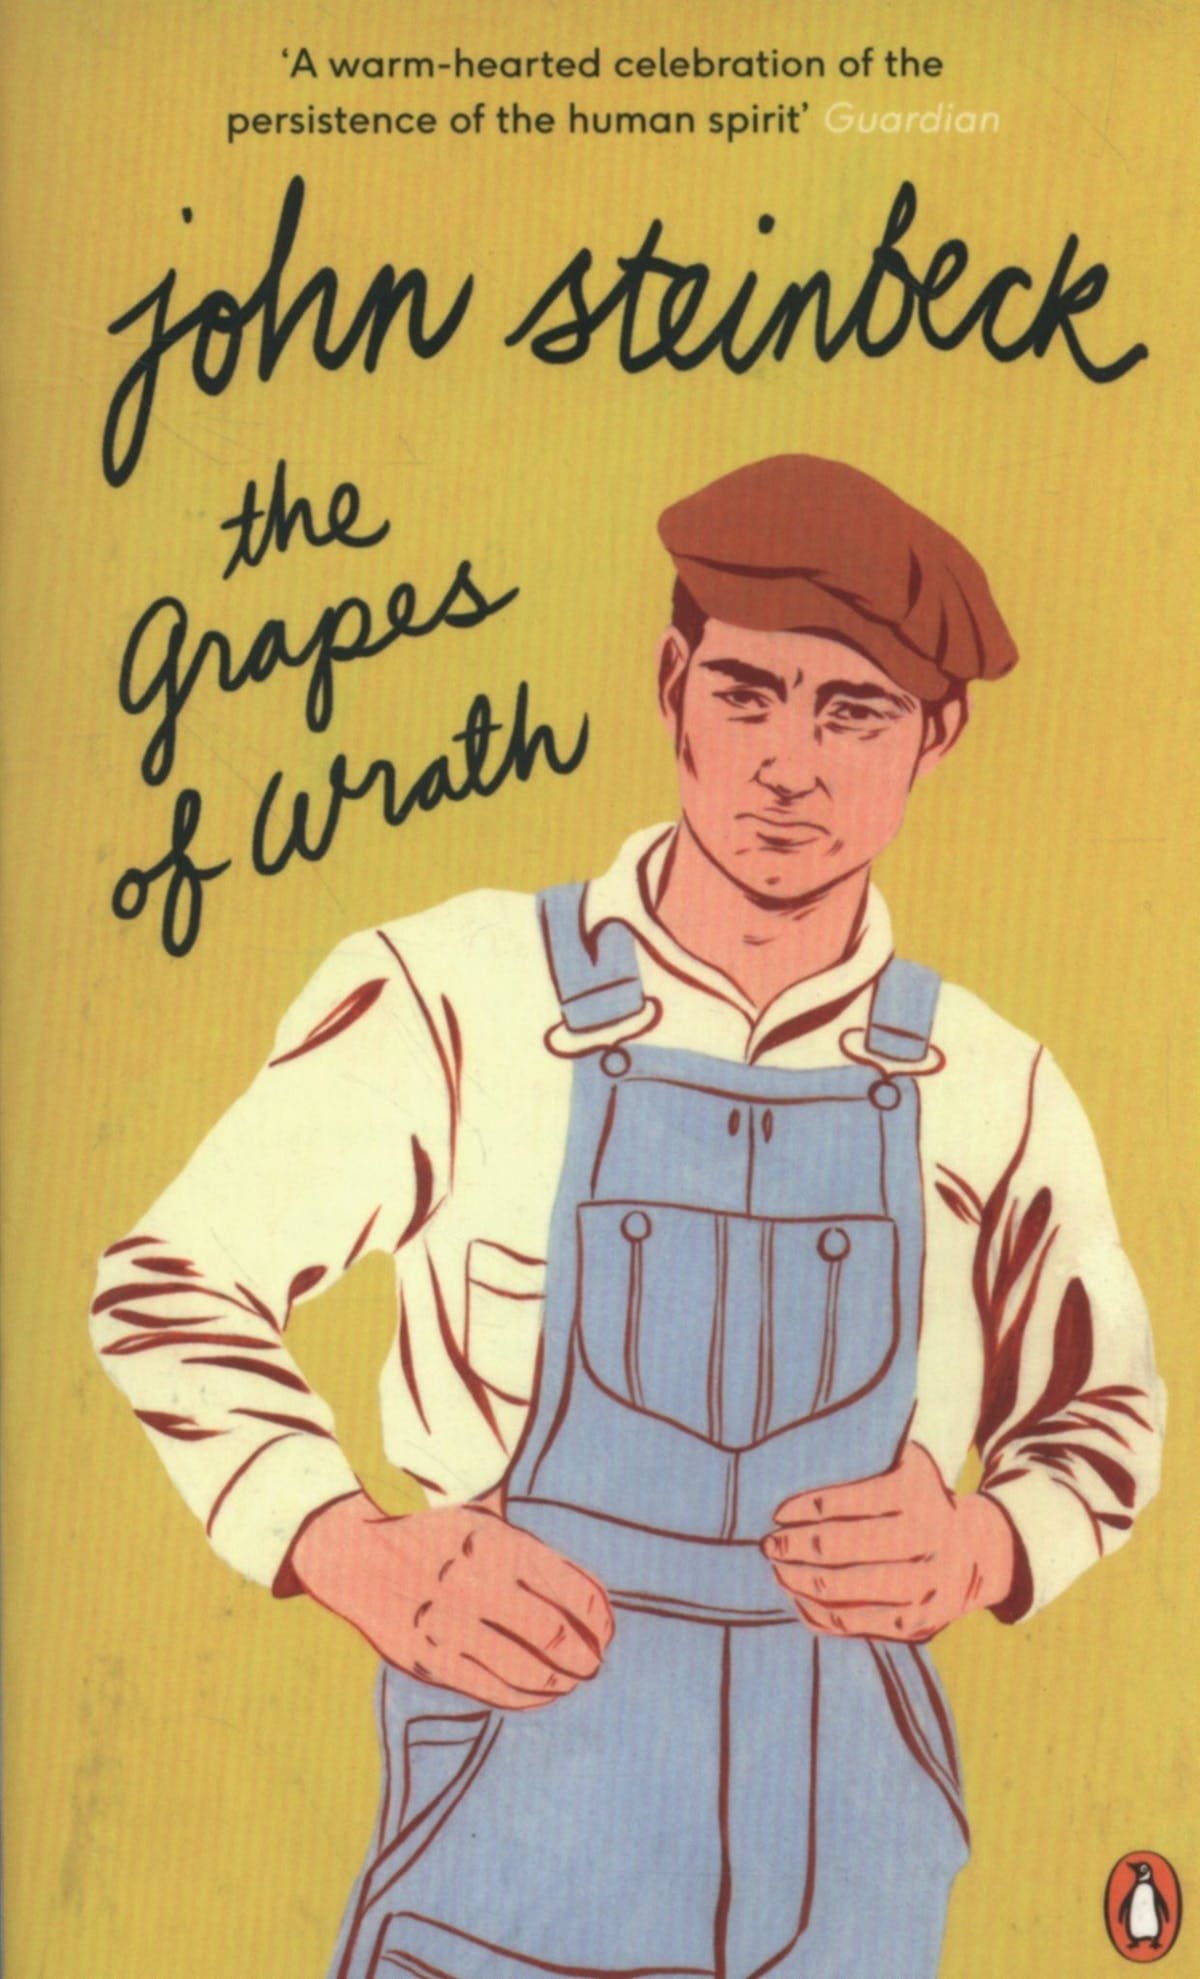 the-grapes-of-wrath-by-john-steinbeck